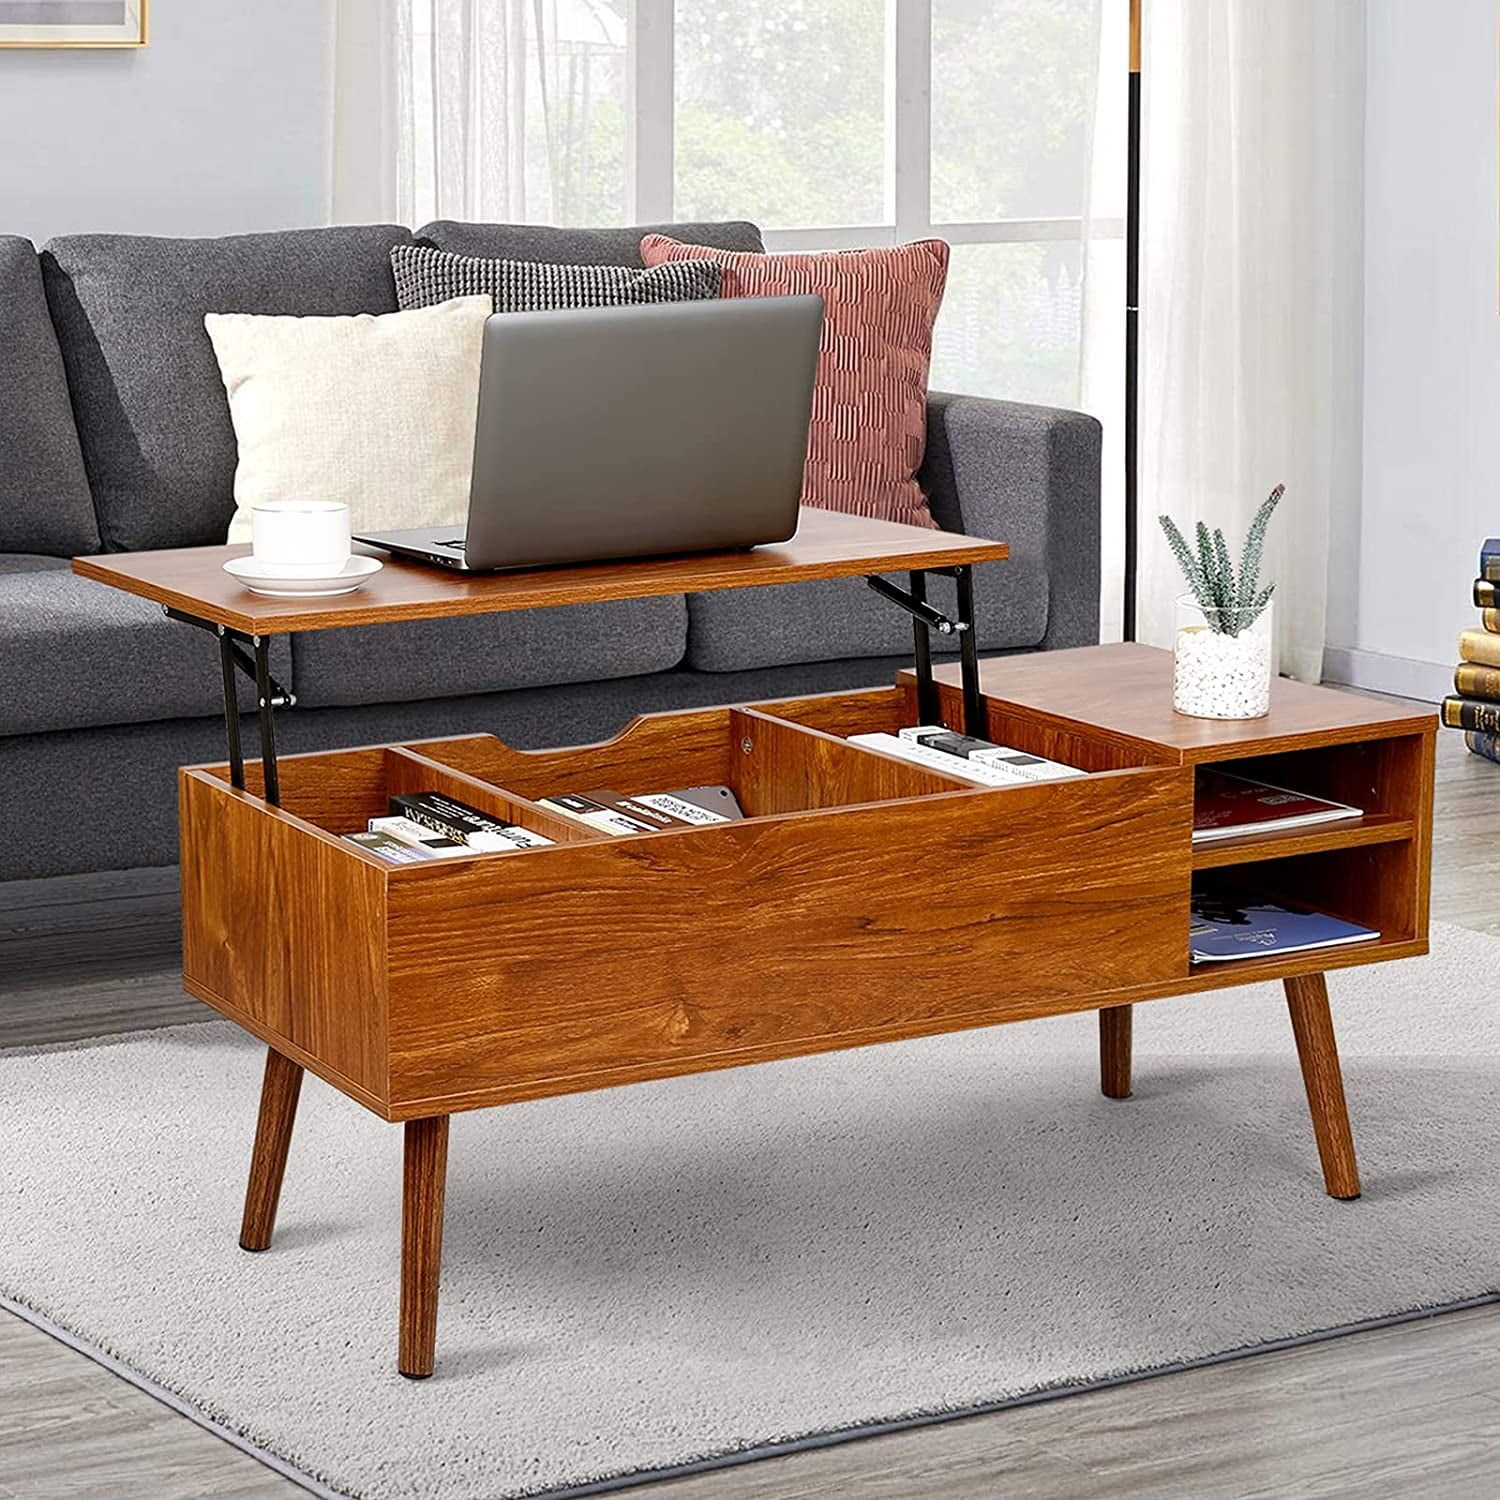 Modern Lift Top Coffee Table With Hidden Compartment Storage,adjustable Intended For Lift Top Coffee Tables With Hidden Storage Compartments (Gallery 1 of 20)